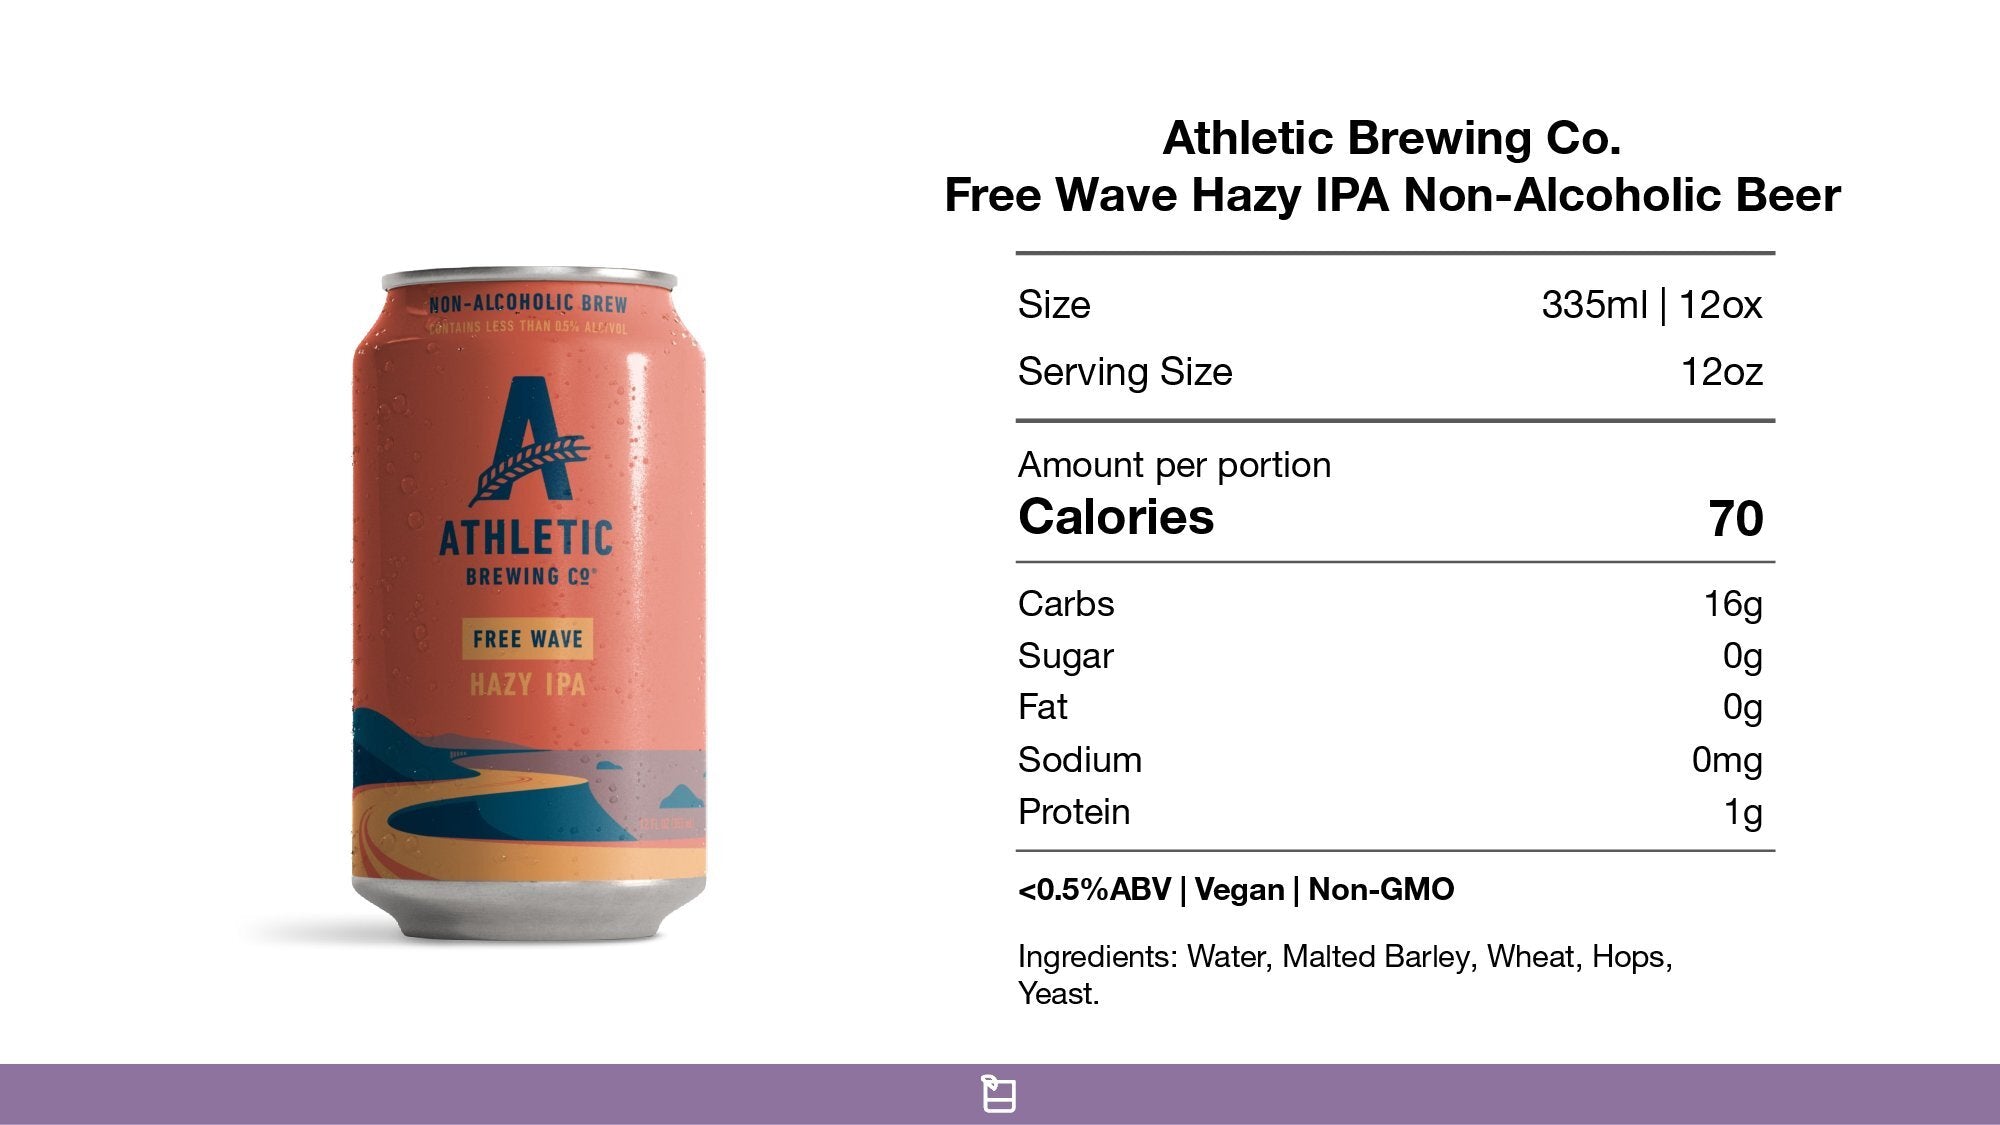 Athletic Brewing Free Wave Hazy IPA Non-Alcoholic Beer Nutrition